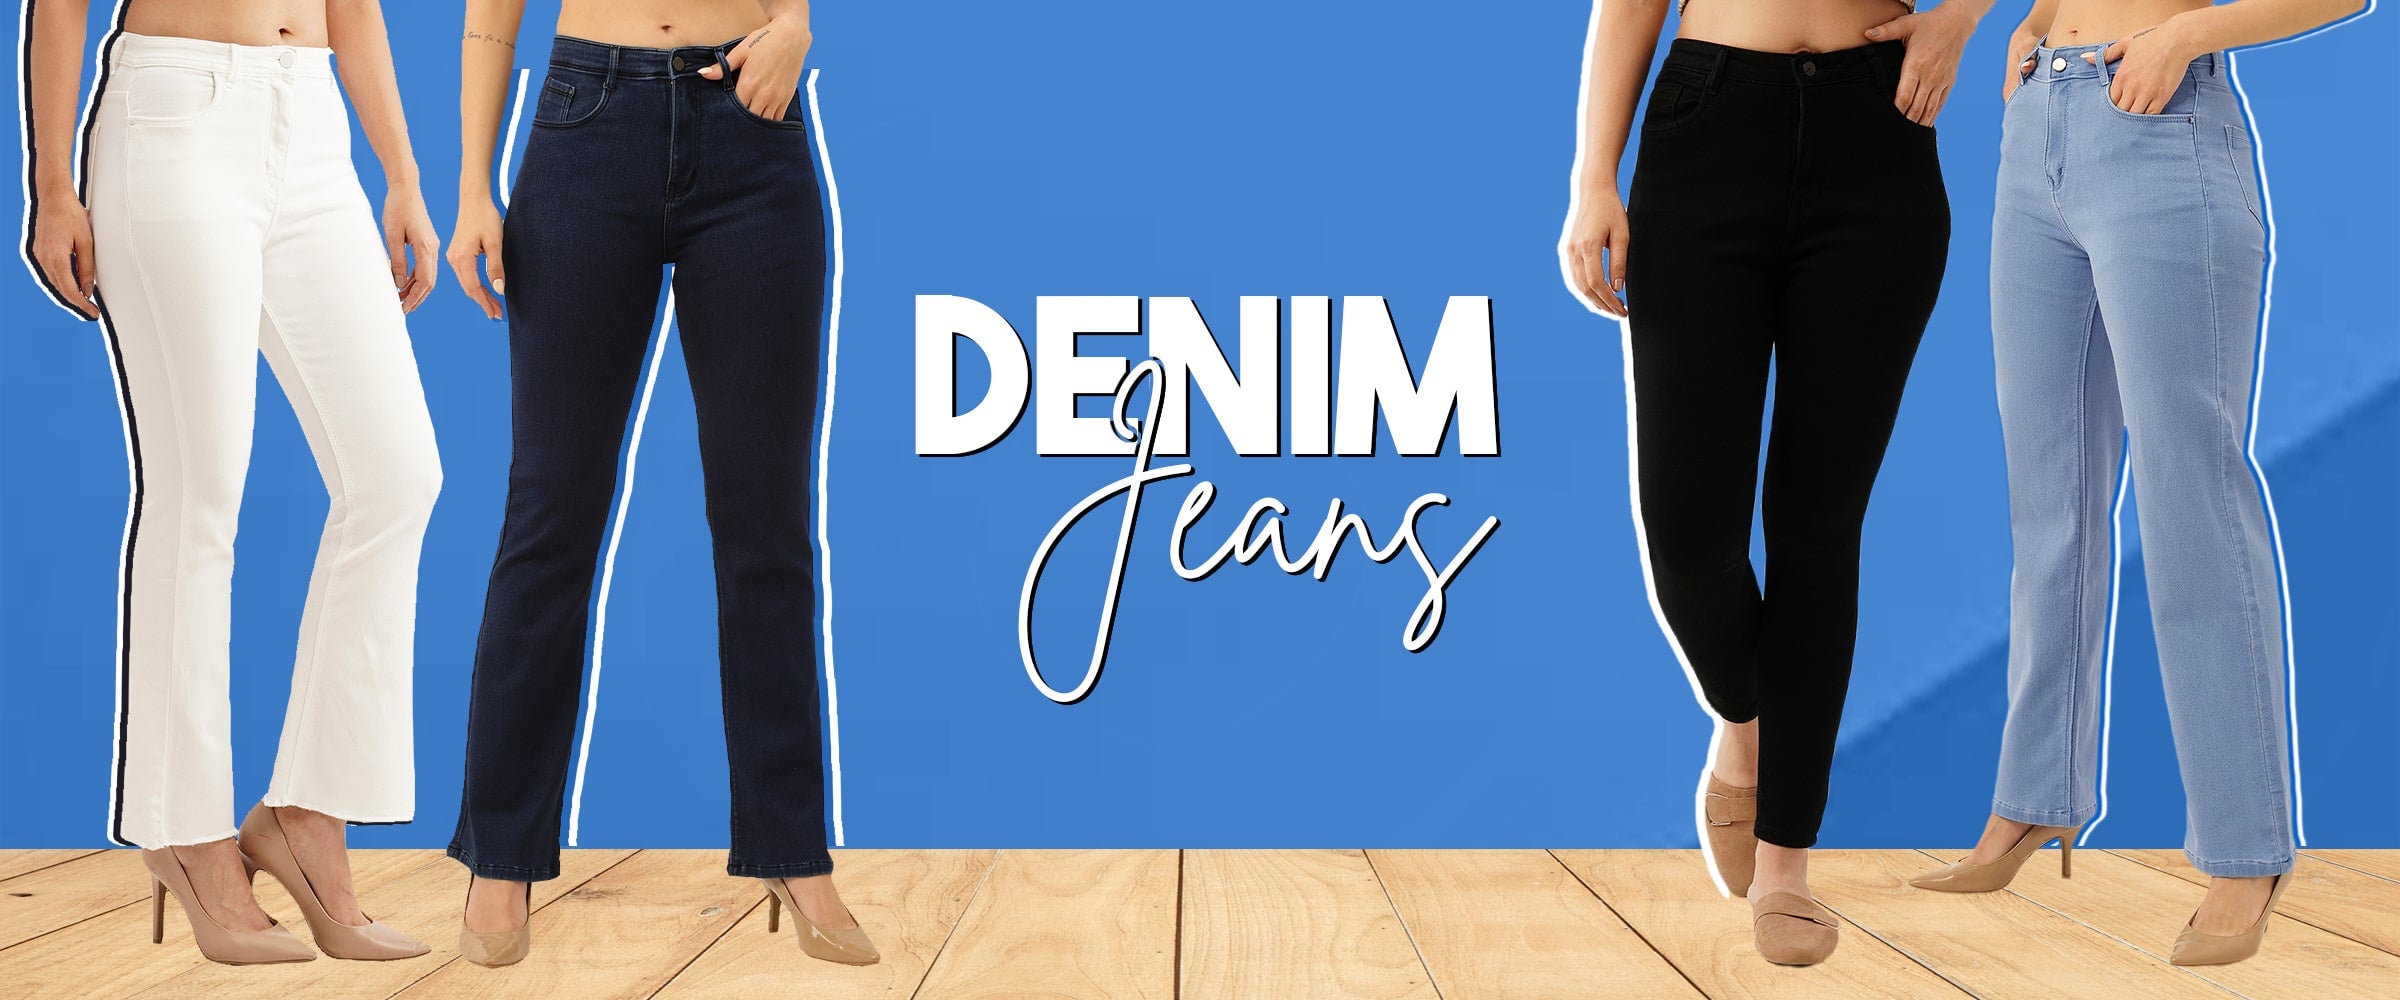 12 Benefits of Loose Fit Jeans for Women in Comparison to Skinny Fit Jeans